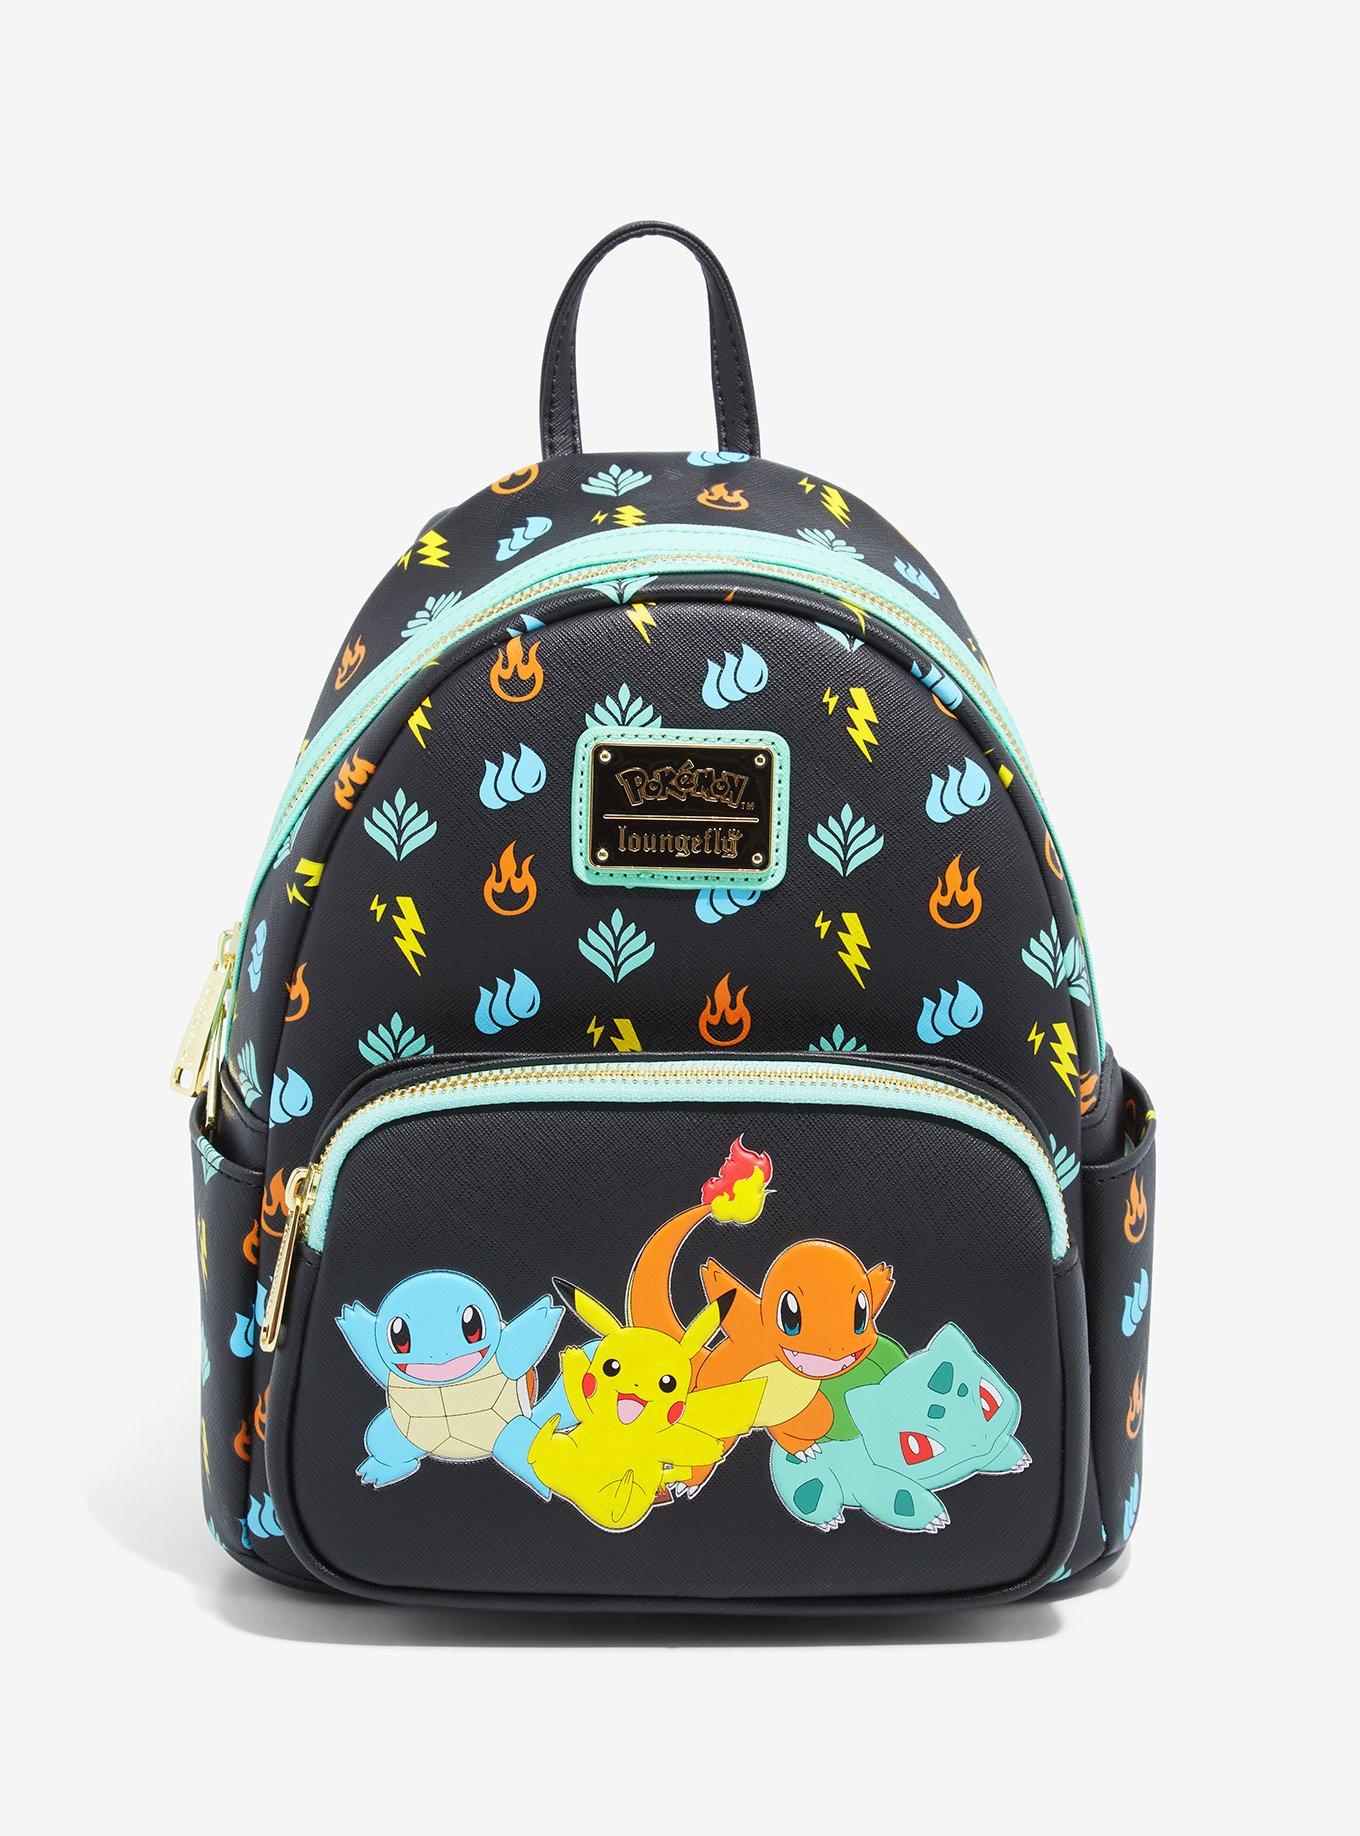 Loungefly Pokemon 151 Mini Backpack And Wallet Exclusive AOP NWT